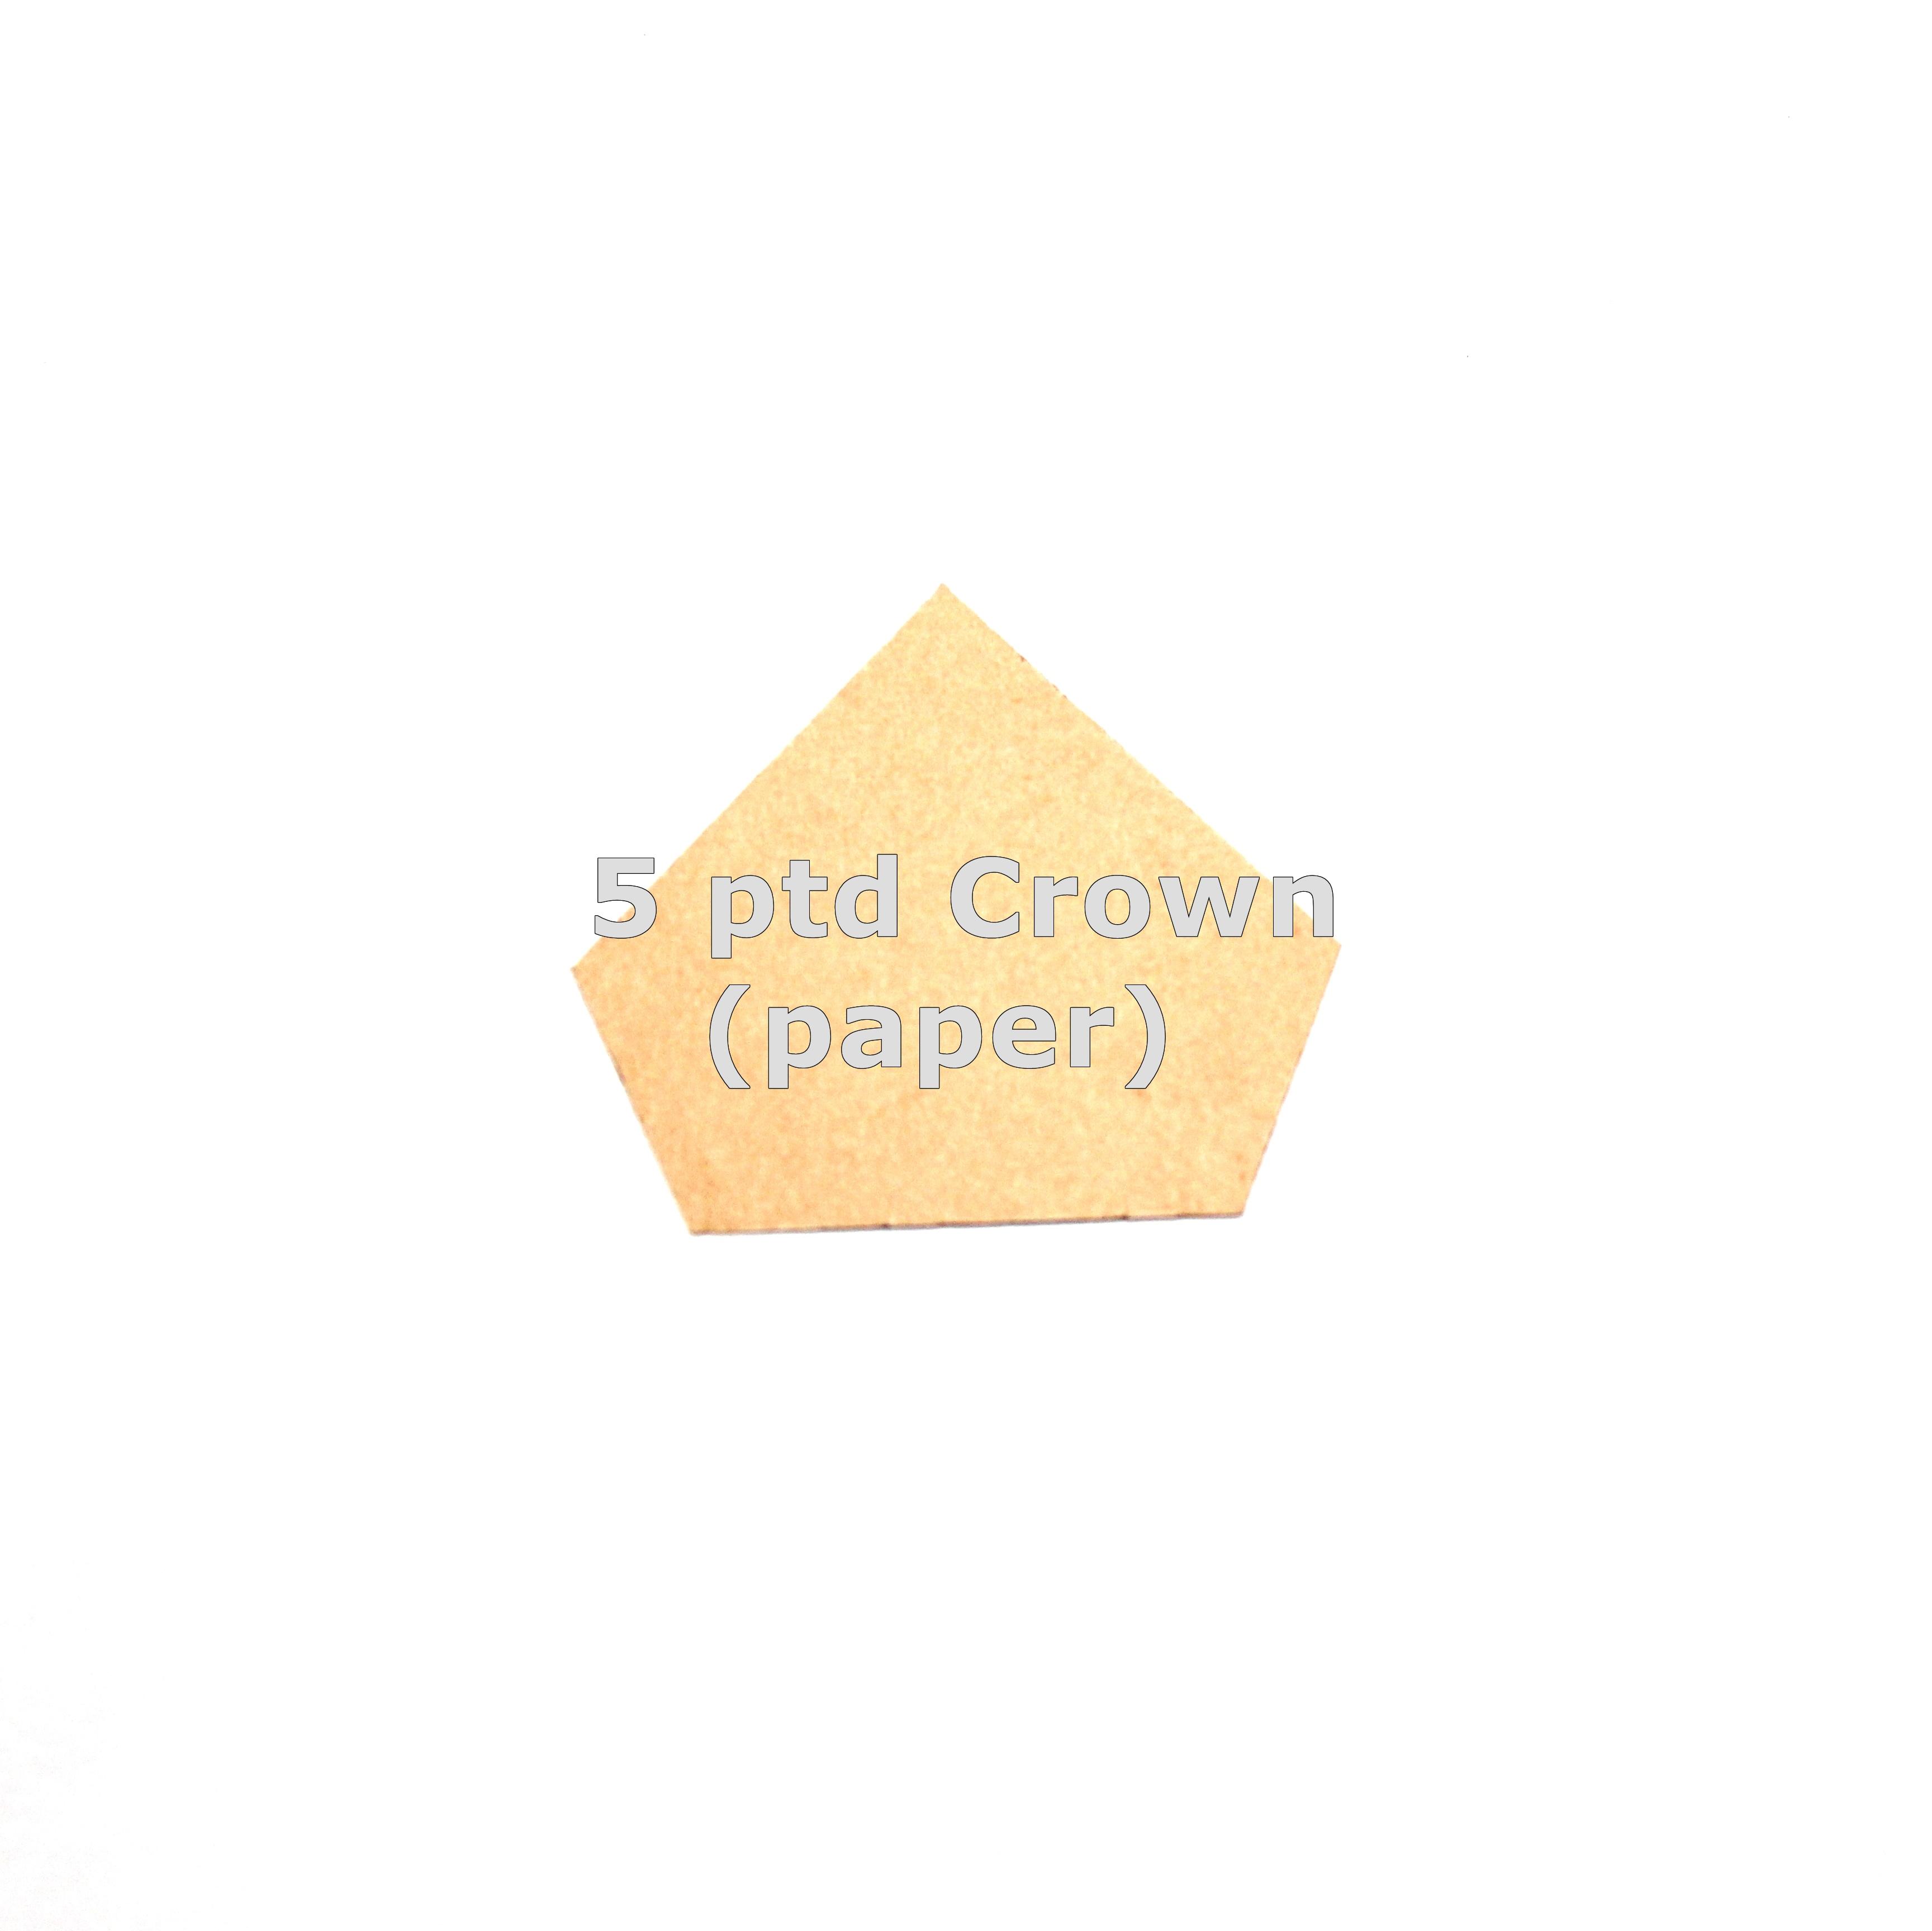 Yellow 5 Point Crown Logo - 5 Pointed Crown (papers) | Cherry Pie Designs